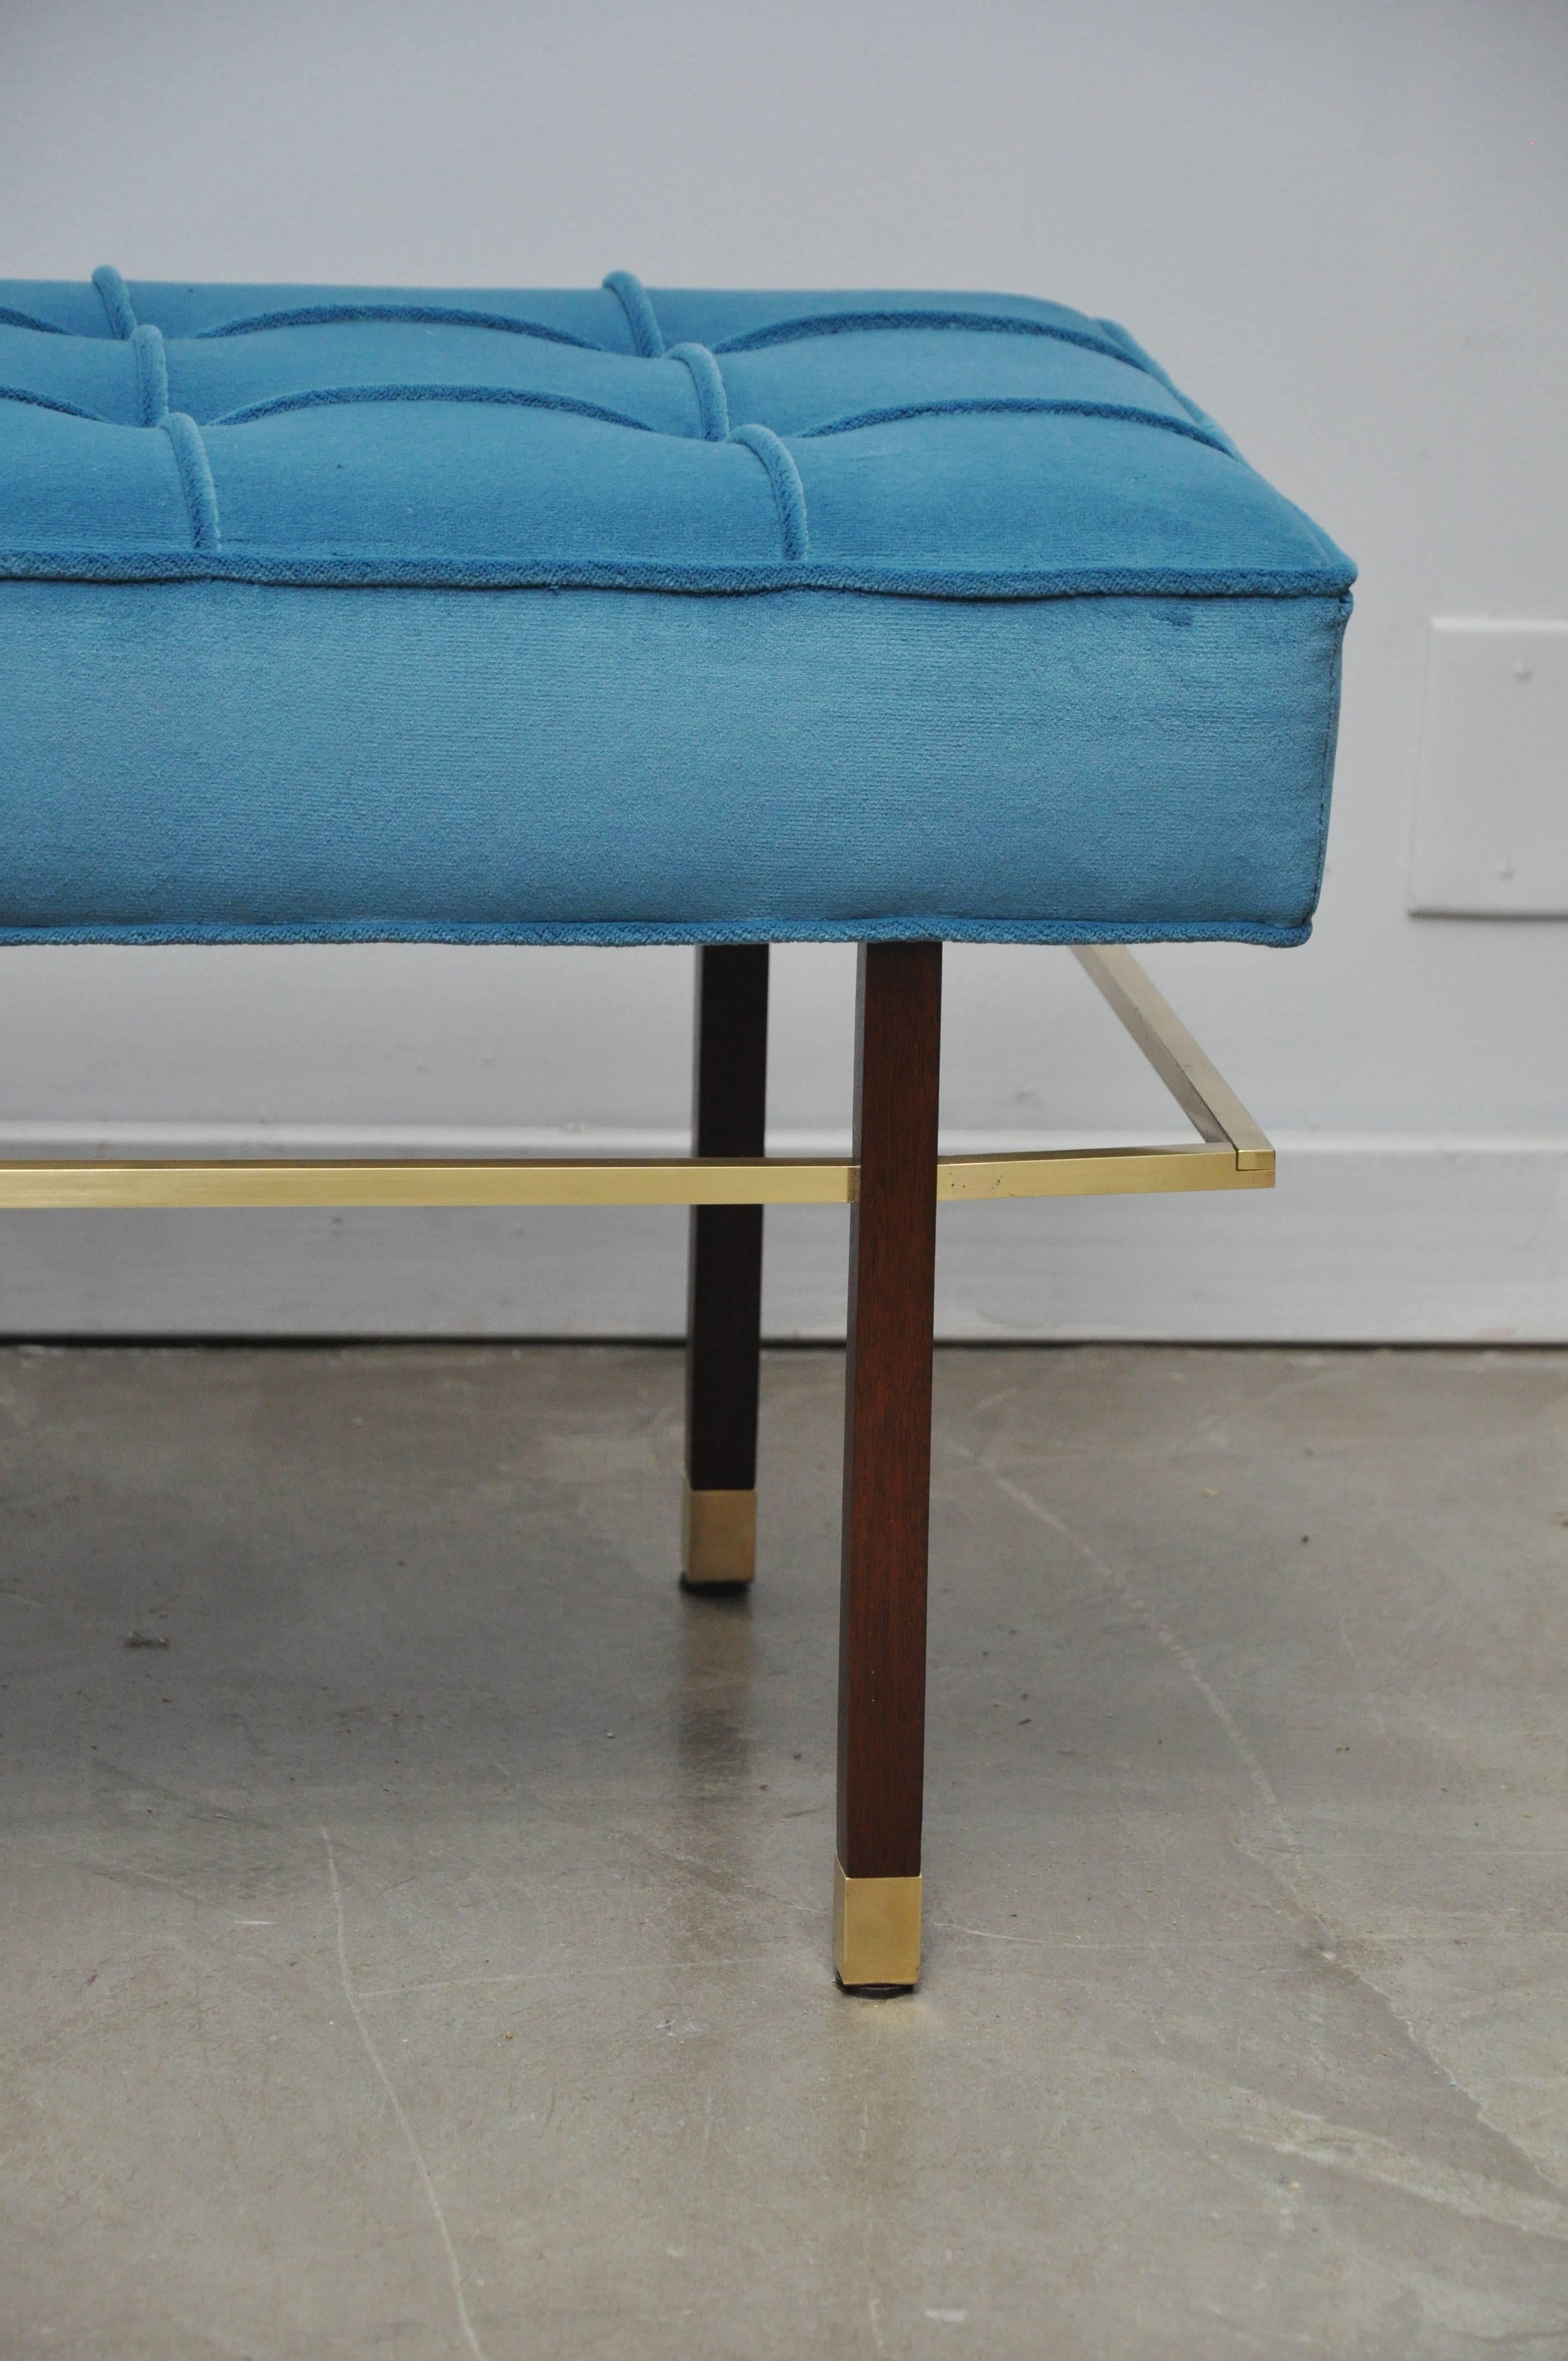 Beautiful walnut frame bench with brass stretchers by Harvey Probber. Fully restored and reupholstered in blue velvet.